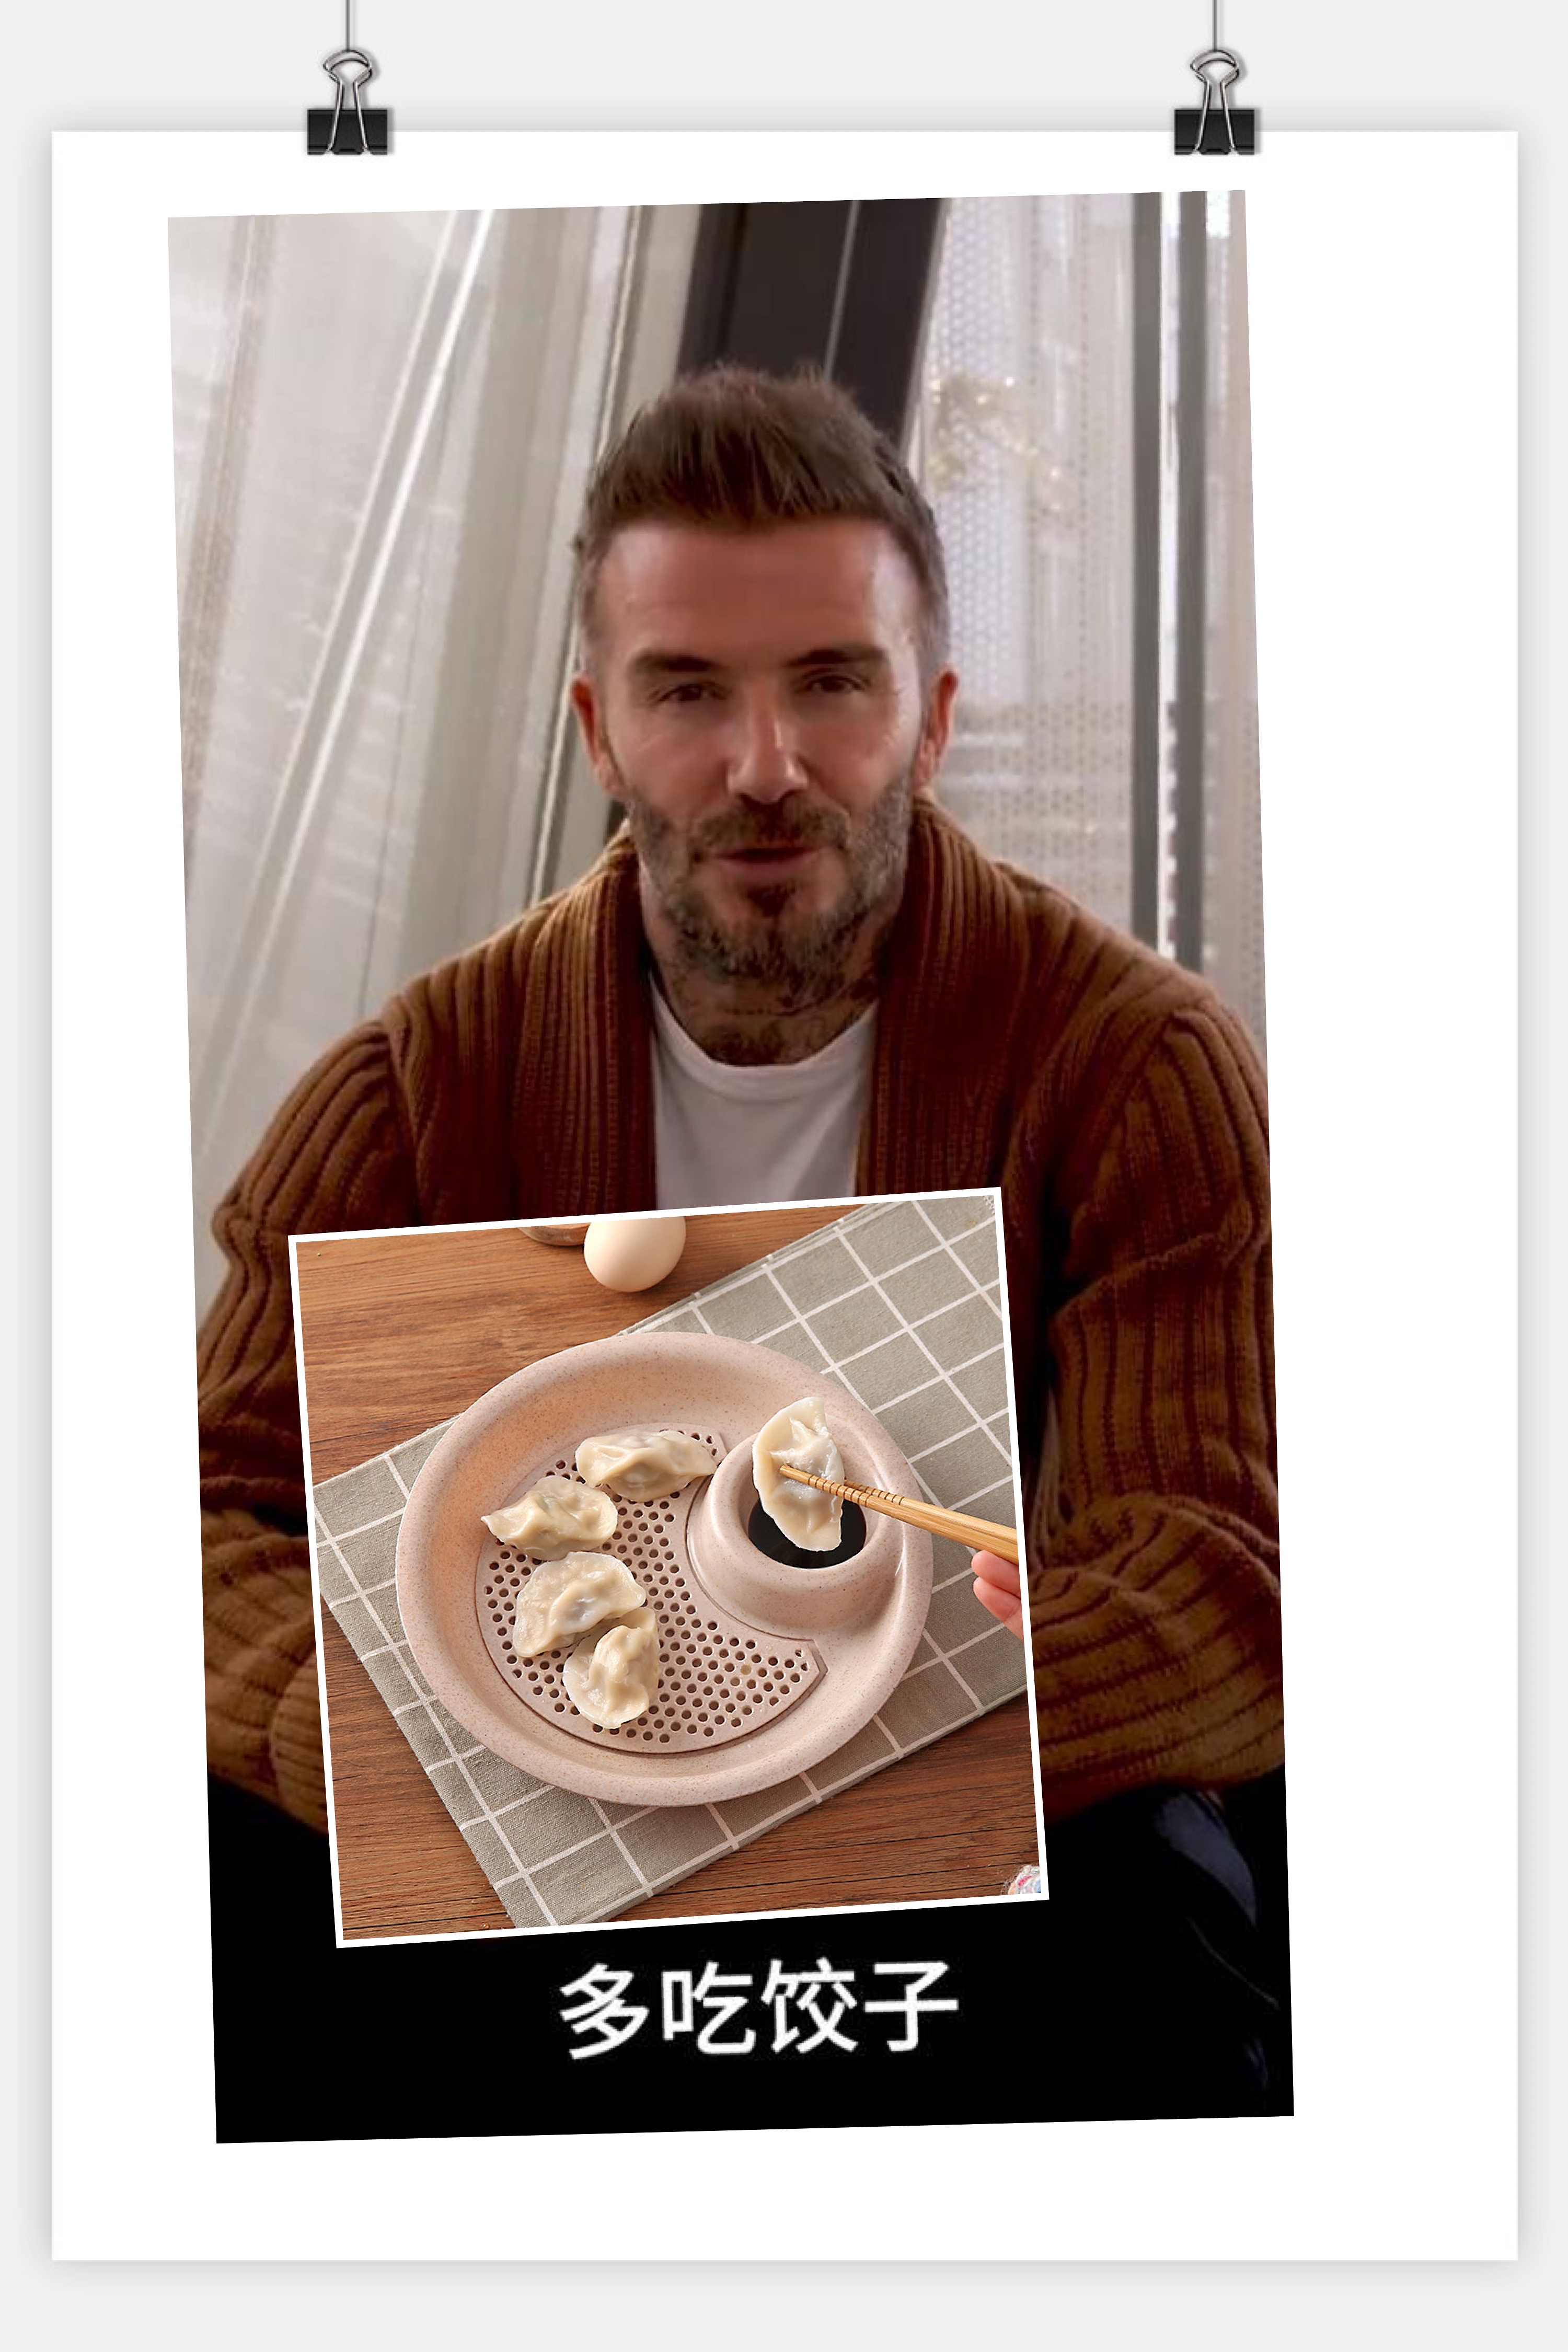 David Beckham wishes his Chinese fans a happy winter solstice: eat more dumplings/use wheat straw dumpling plates